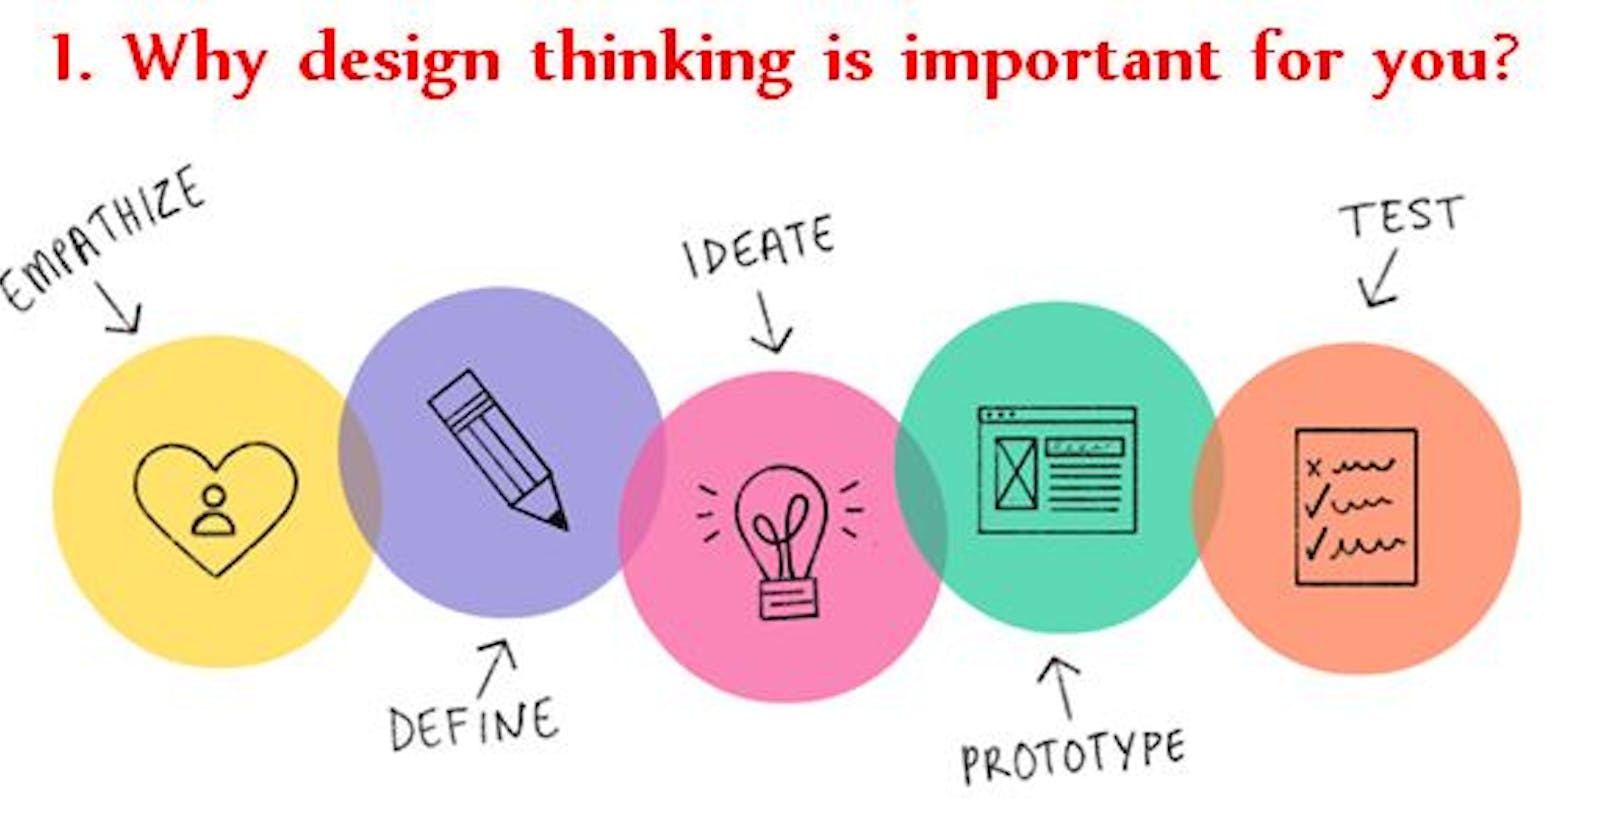 Why design thinking is important for you?